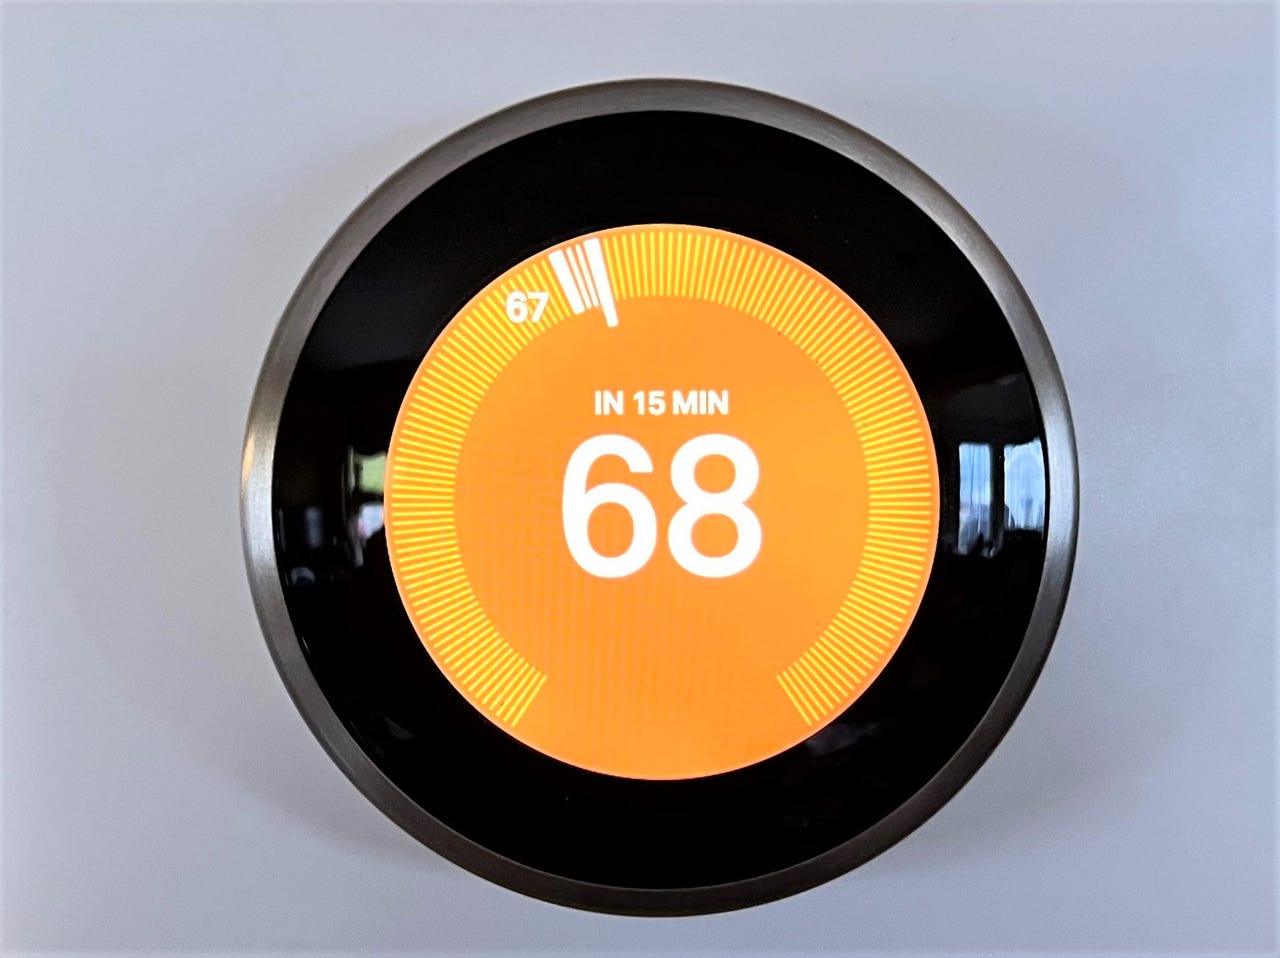 nest-thermostat.png